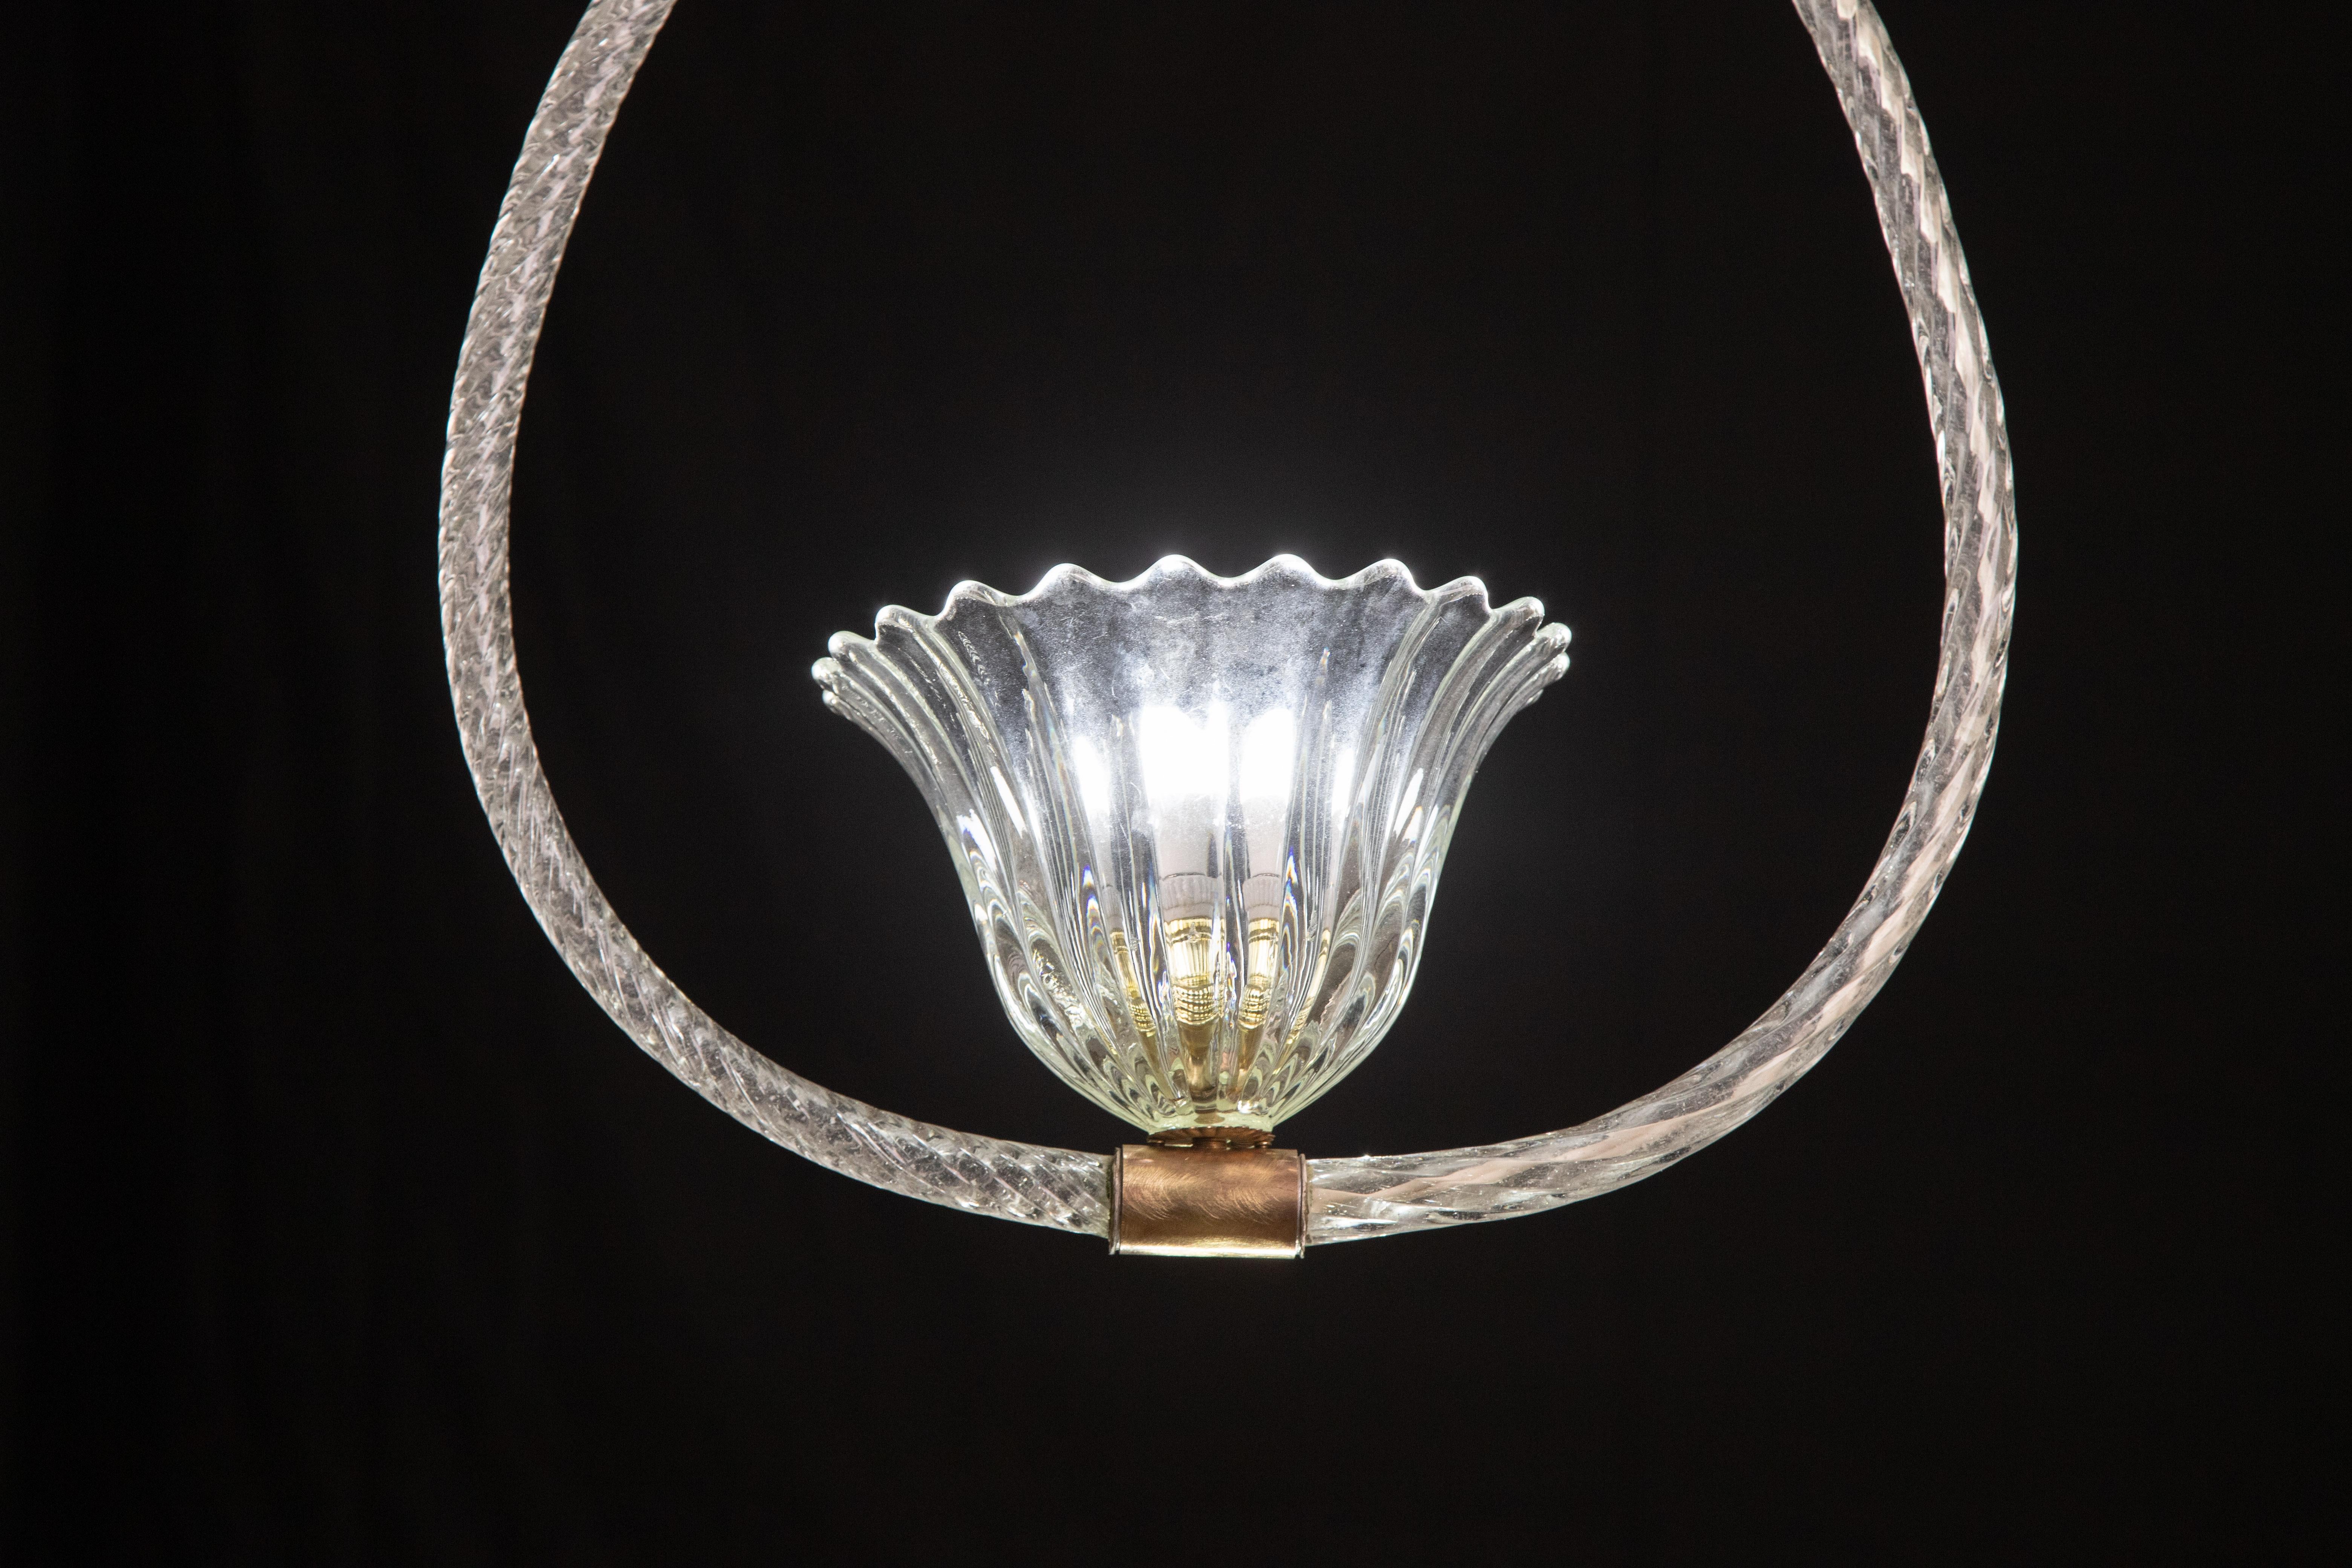 Set of 2 Barovier and Toso Light Pendant, Murano Glass, 1940s For Sale 1